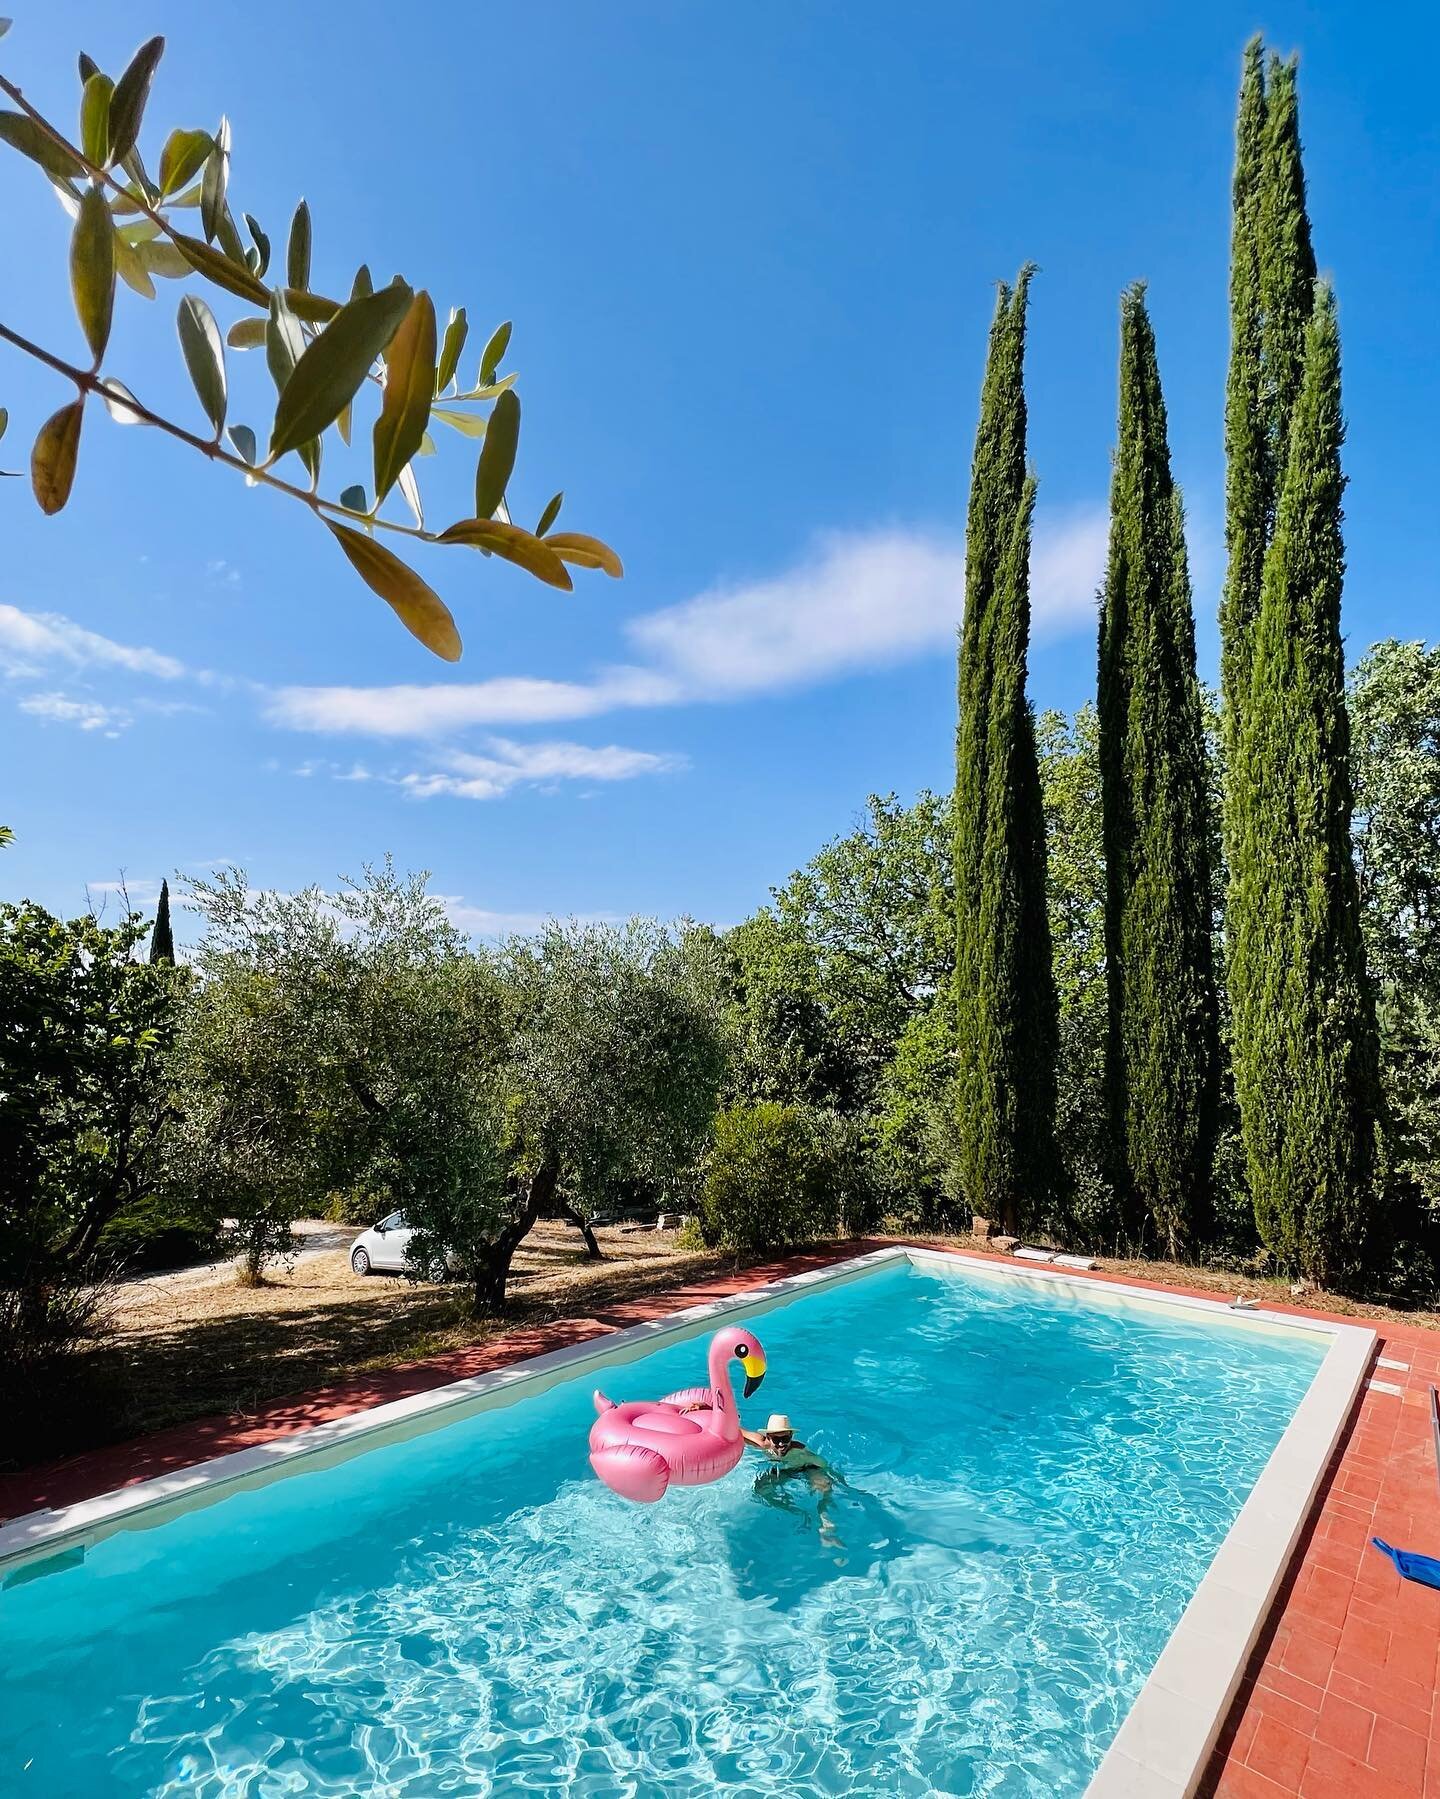 The FIRST thing we refurbished and fixed? The pool of course! 😎 It&rsquo;s a hot summer in Umbria and while work is being done on the rest of the property, we get to enjoy our pool 🌞
.
We look forward to having you as our guests!
One week stays (or